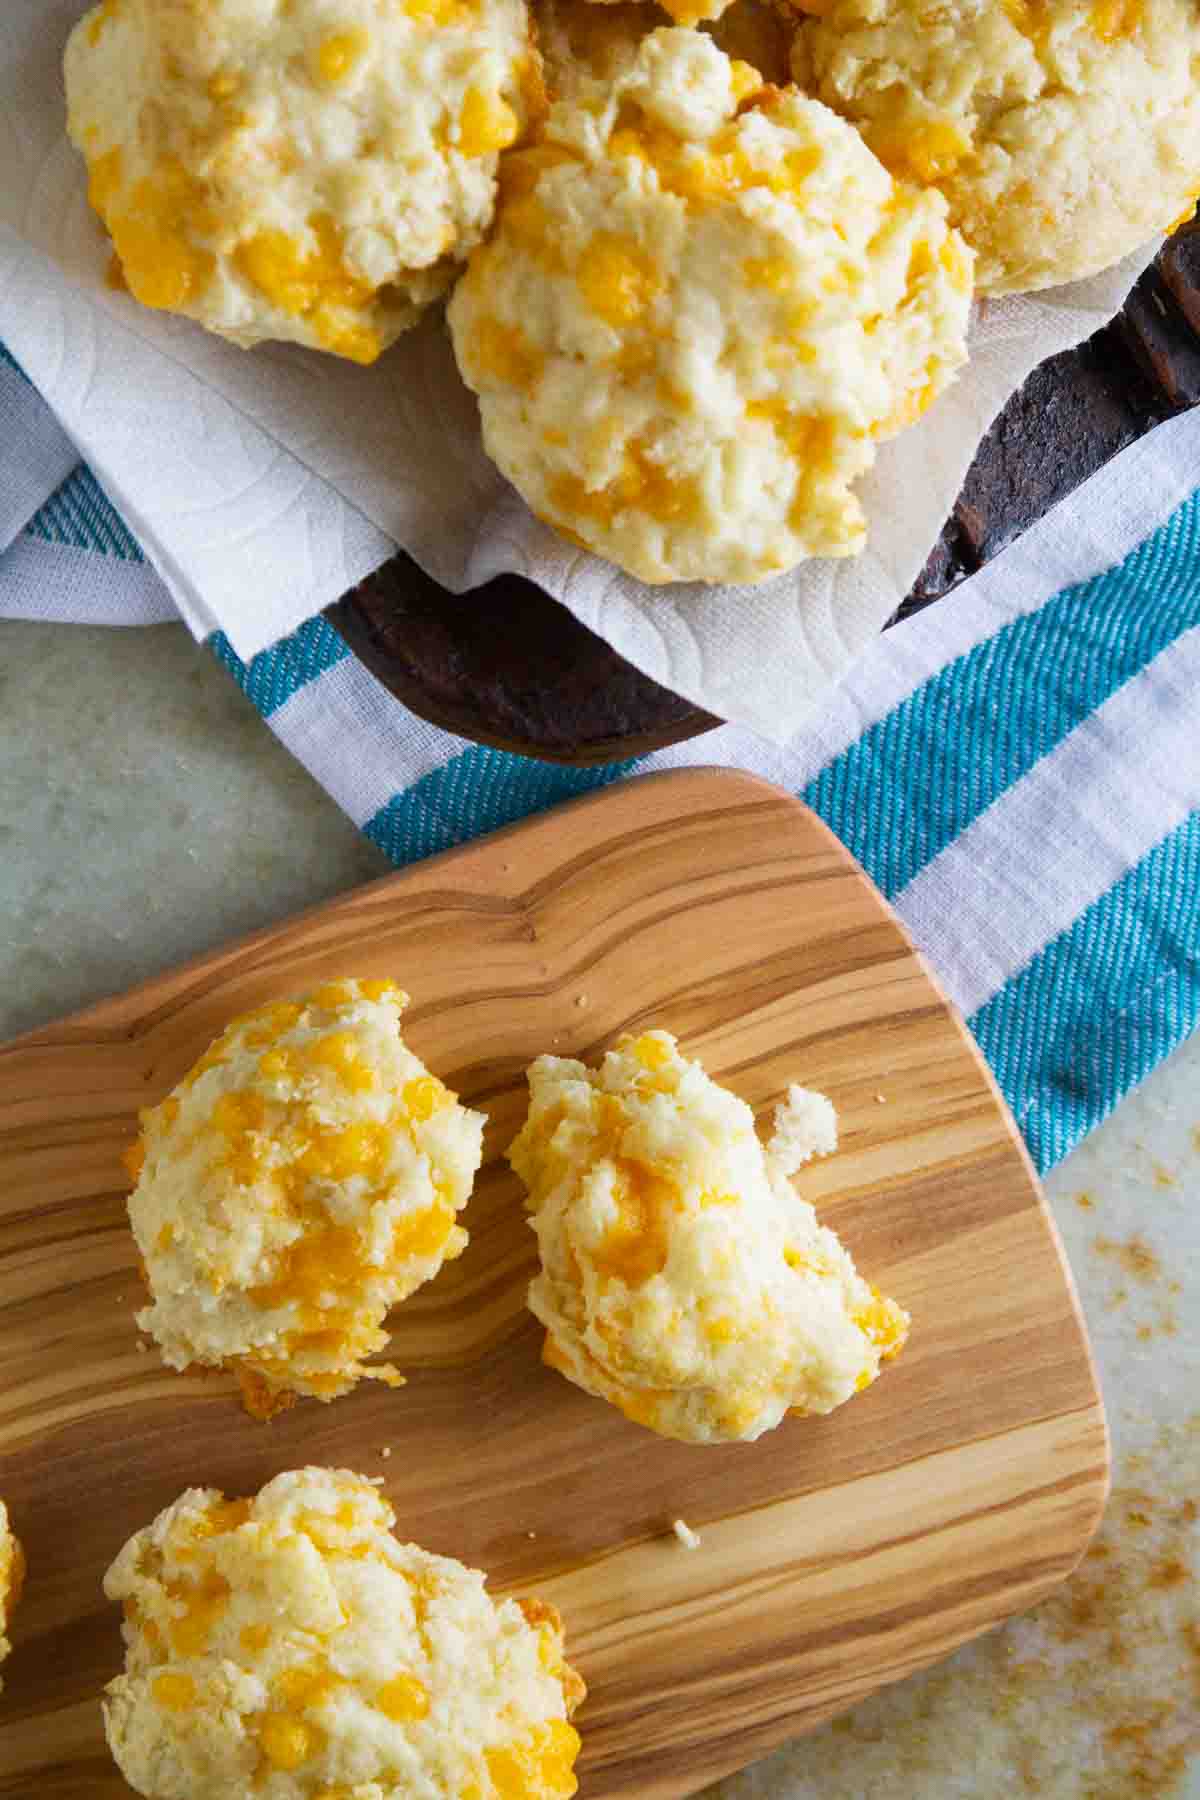 Garlic and cheddar sour cream biscuits with melted cheddar